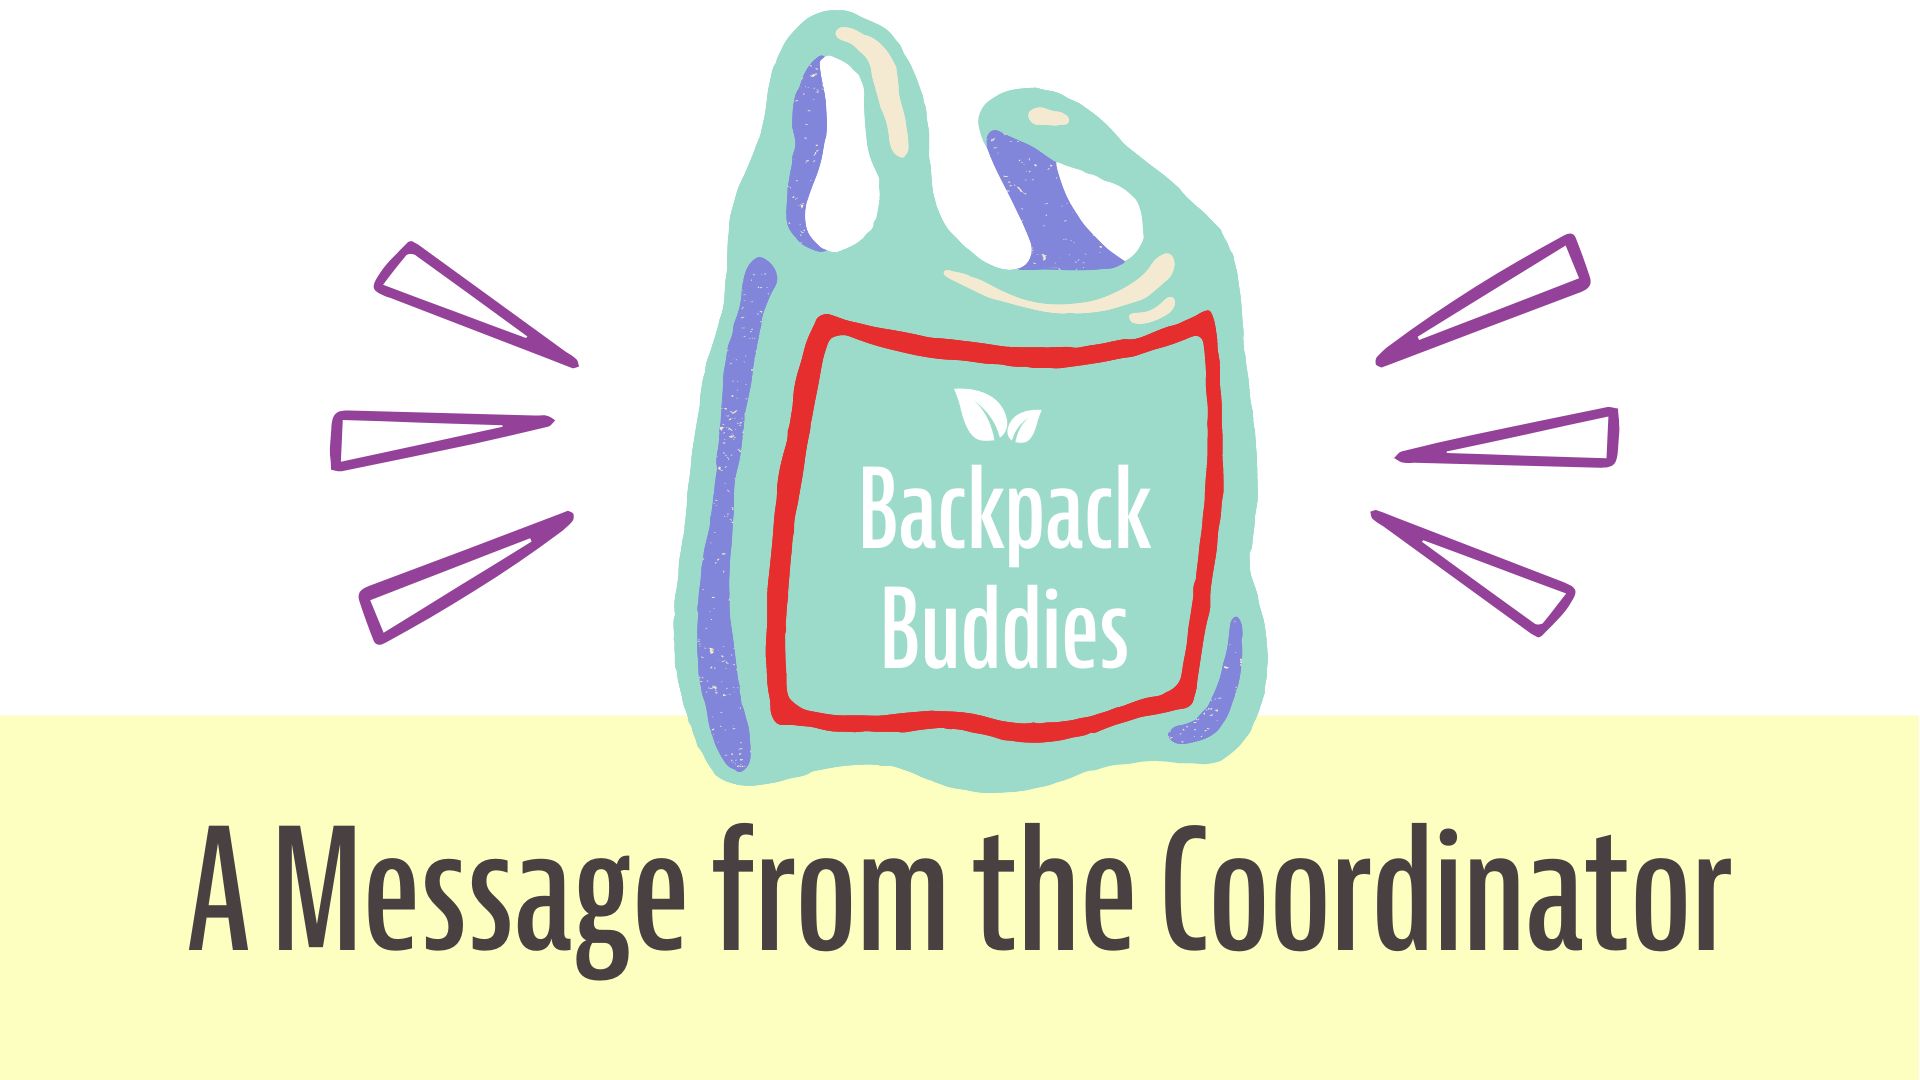 A Message from the Backpack Buddies Coordinator